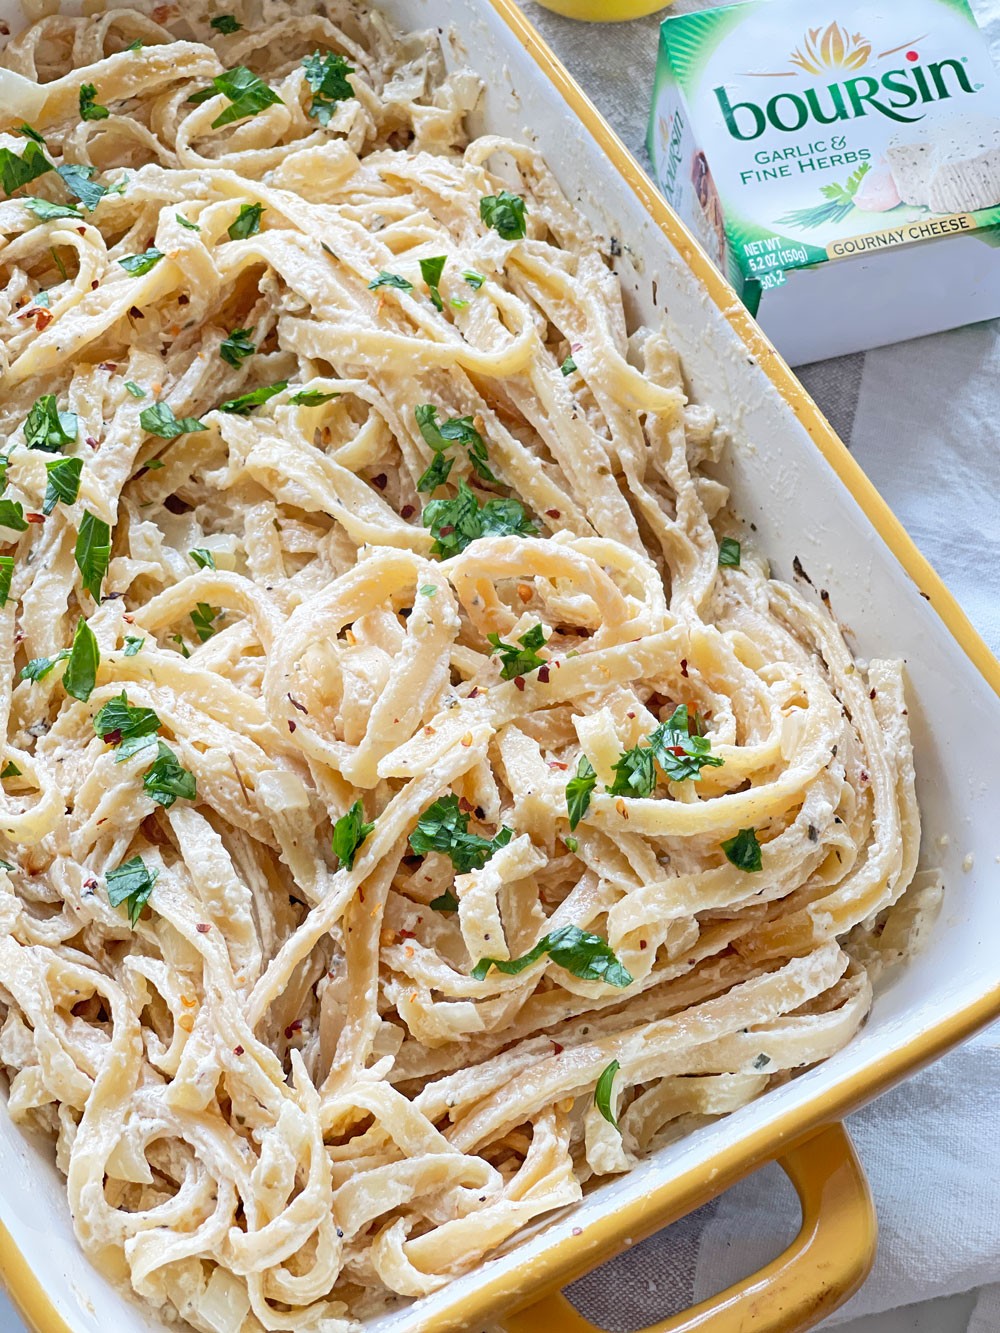 Boursin Alfredo (TikTok Hack Recipe). This is the perfect busy weeknight dinner. This is a TikTok cooking hack. www.ChopHappy.com #TikTokHack #boursincheese